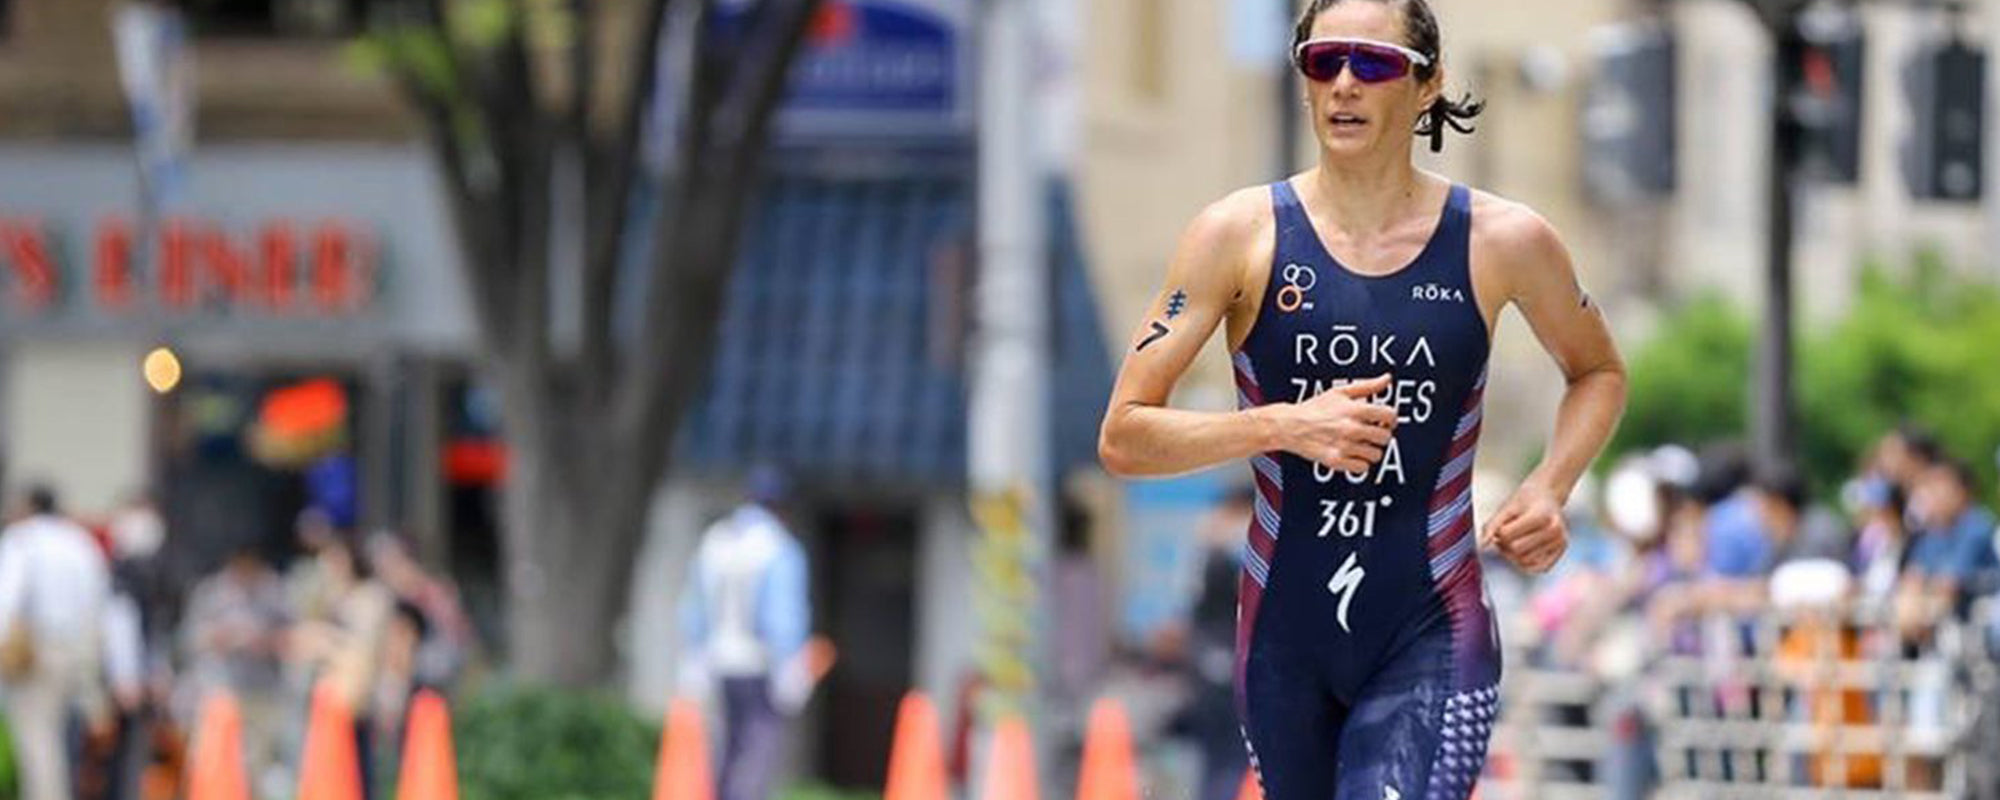 Q&A with World #1 Ranked Triathlete, Katie Zaferes